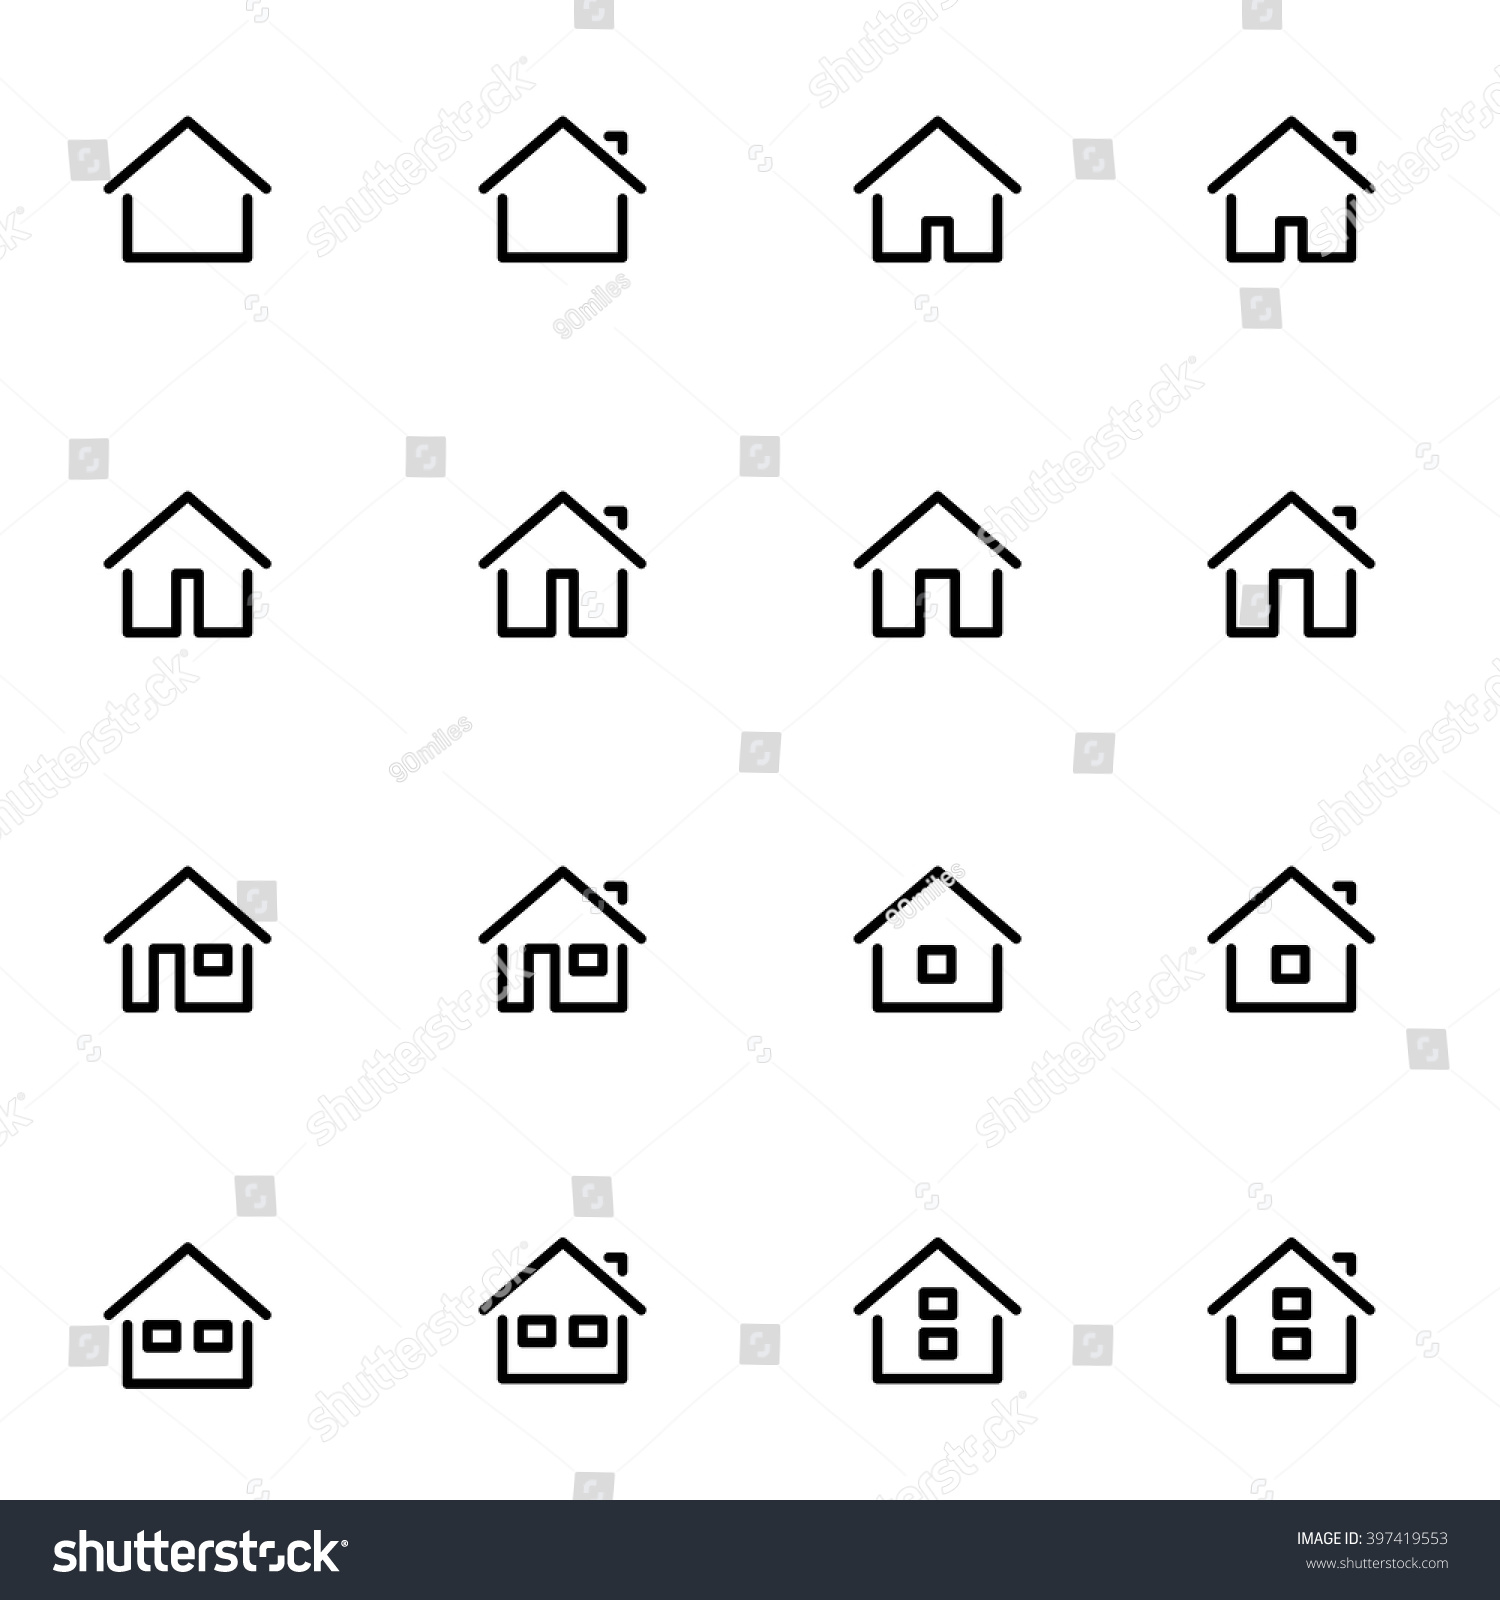 Set 1 of line icons representing house Vector Illustration. House and home simple symbols #397419553